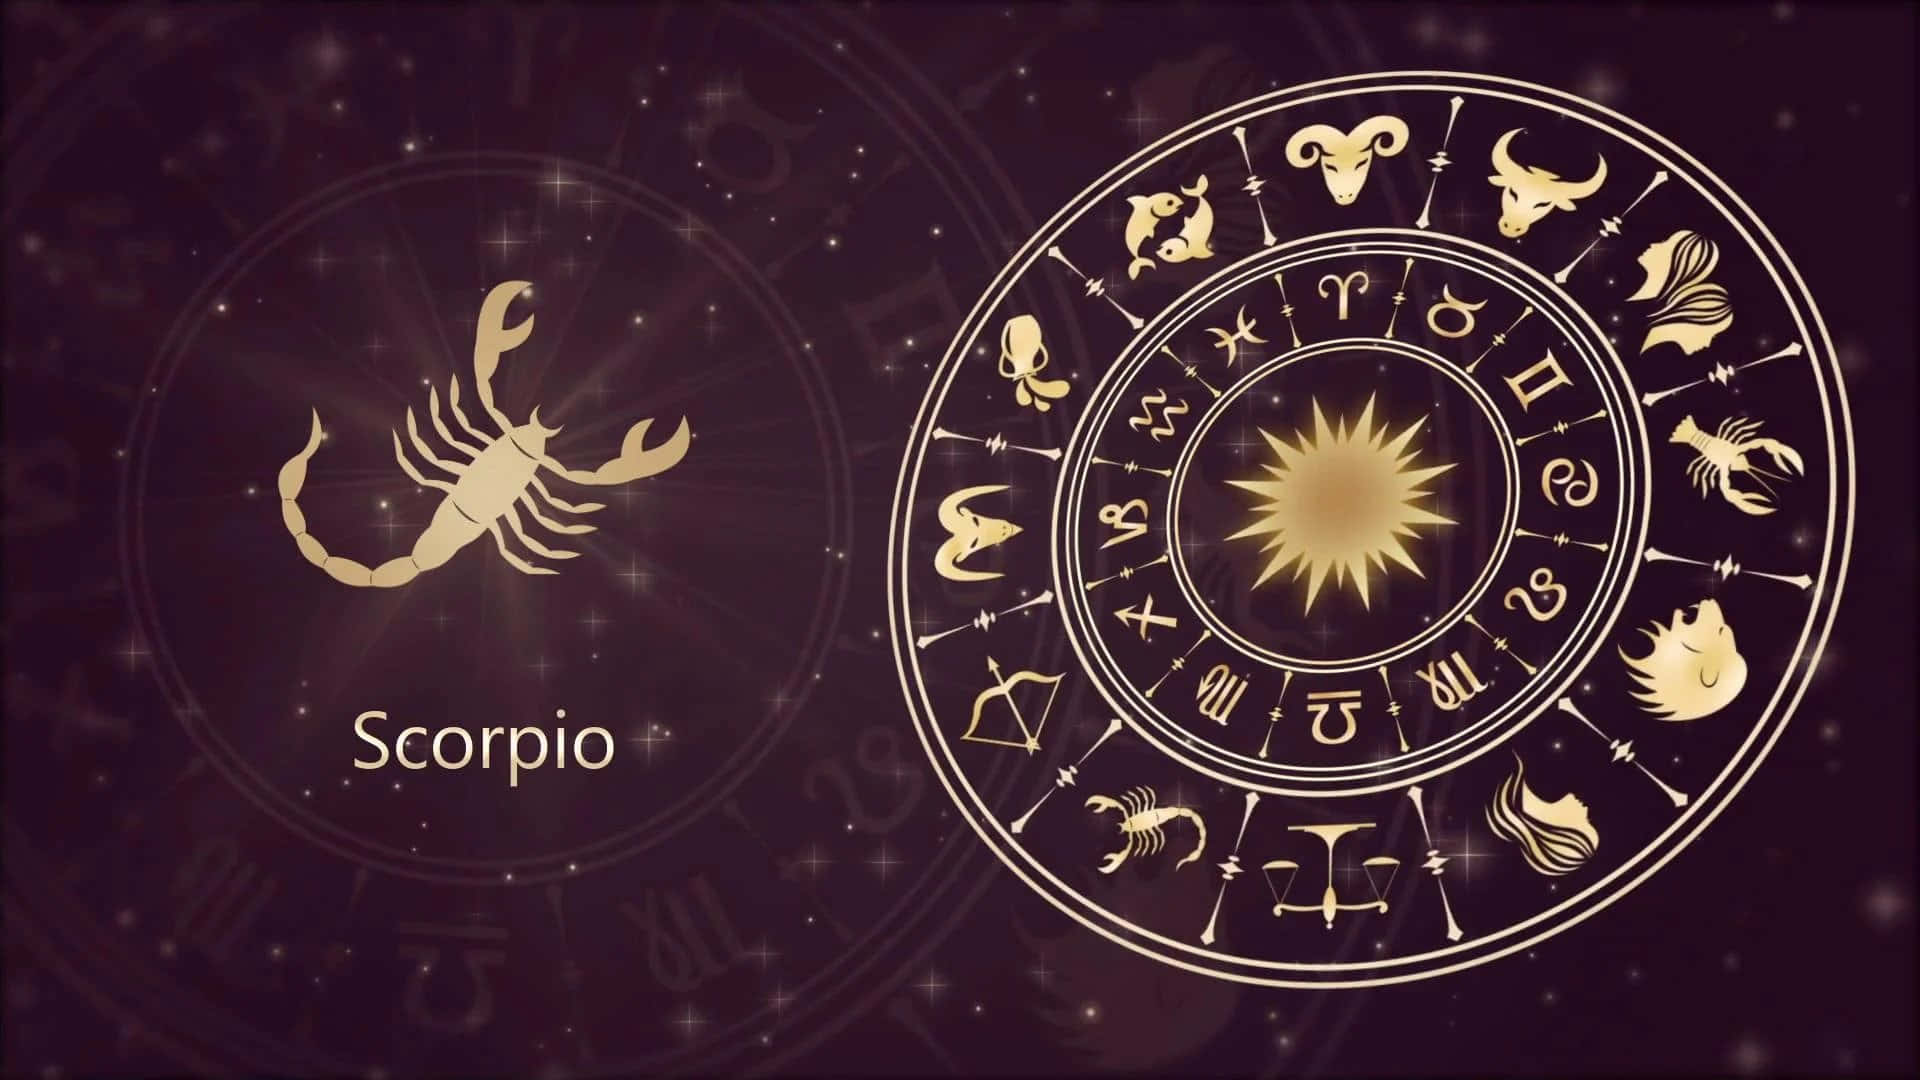 Scorpio Zodiac Sign In The Circle With Golden Stars